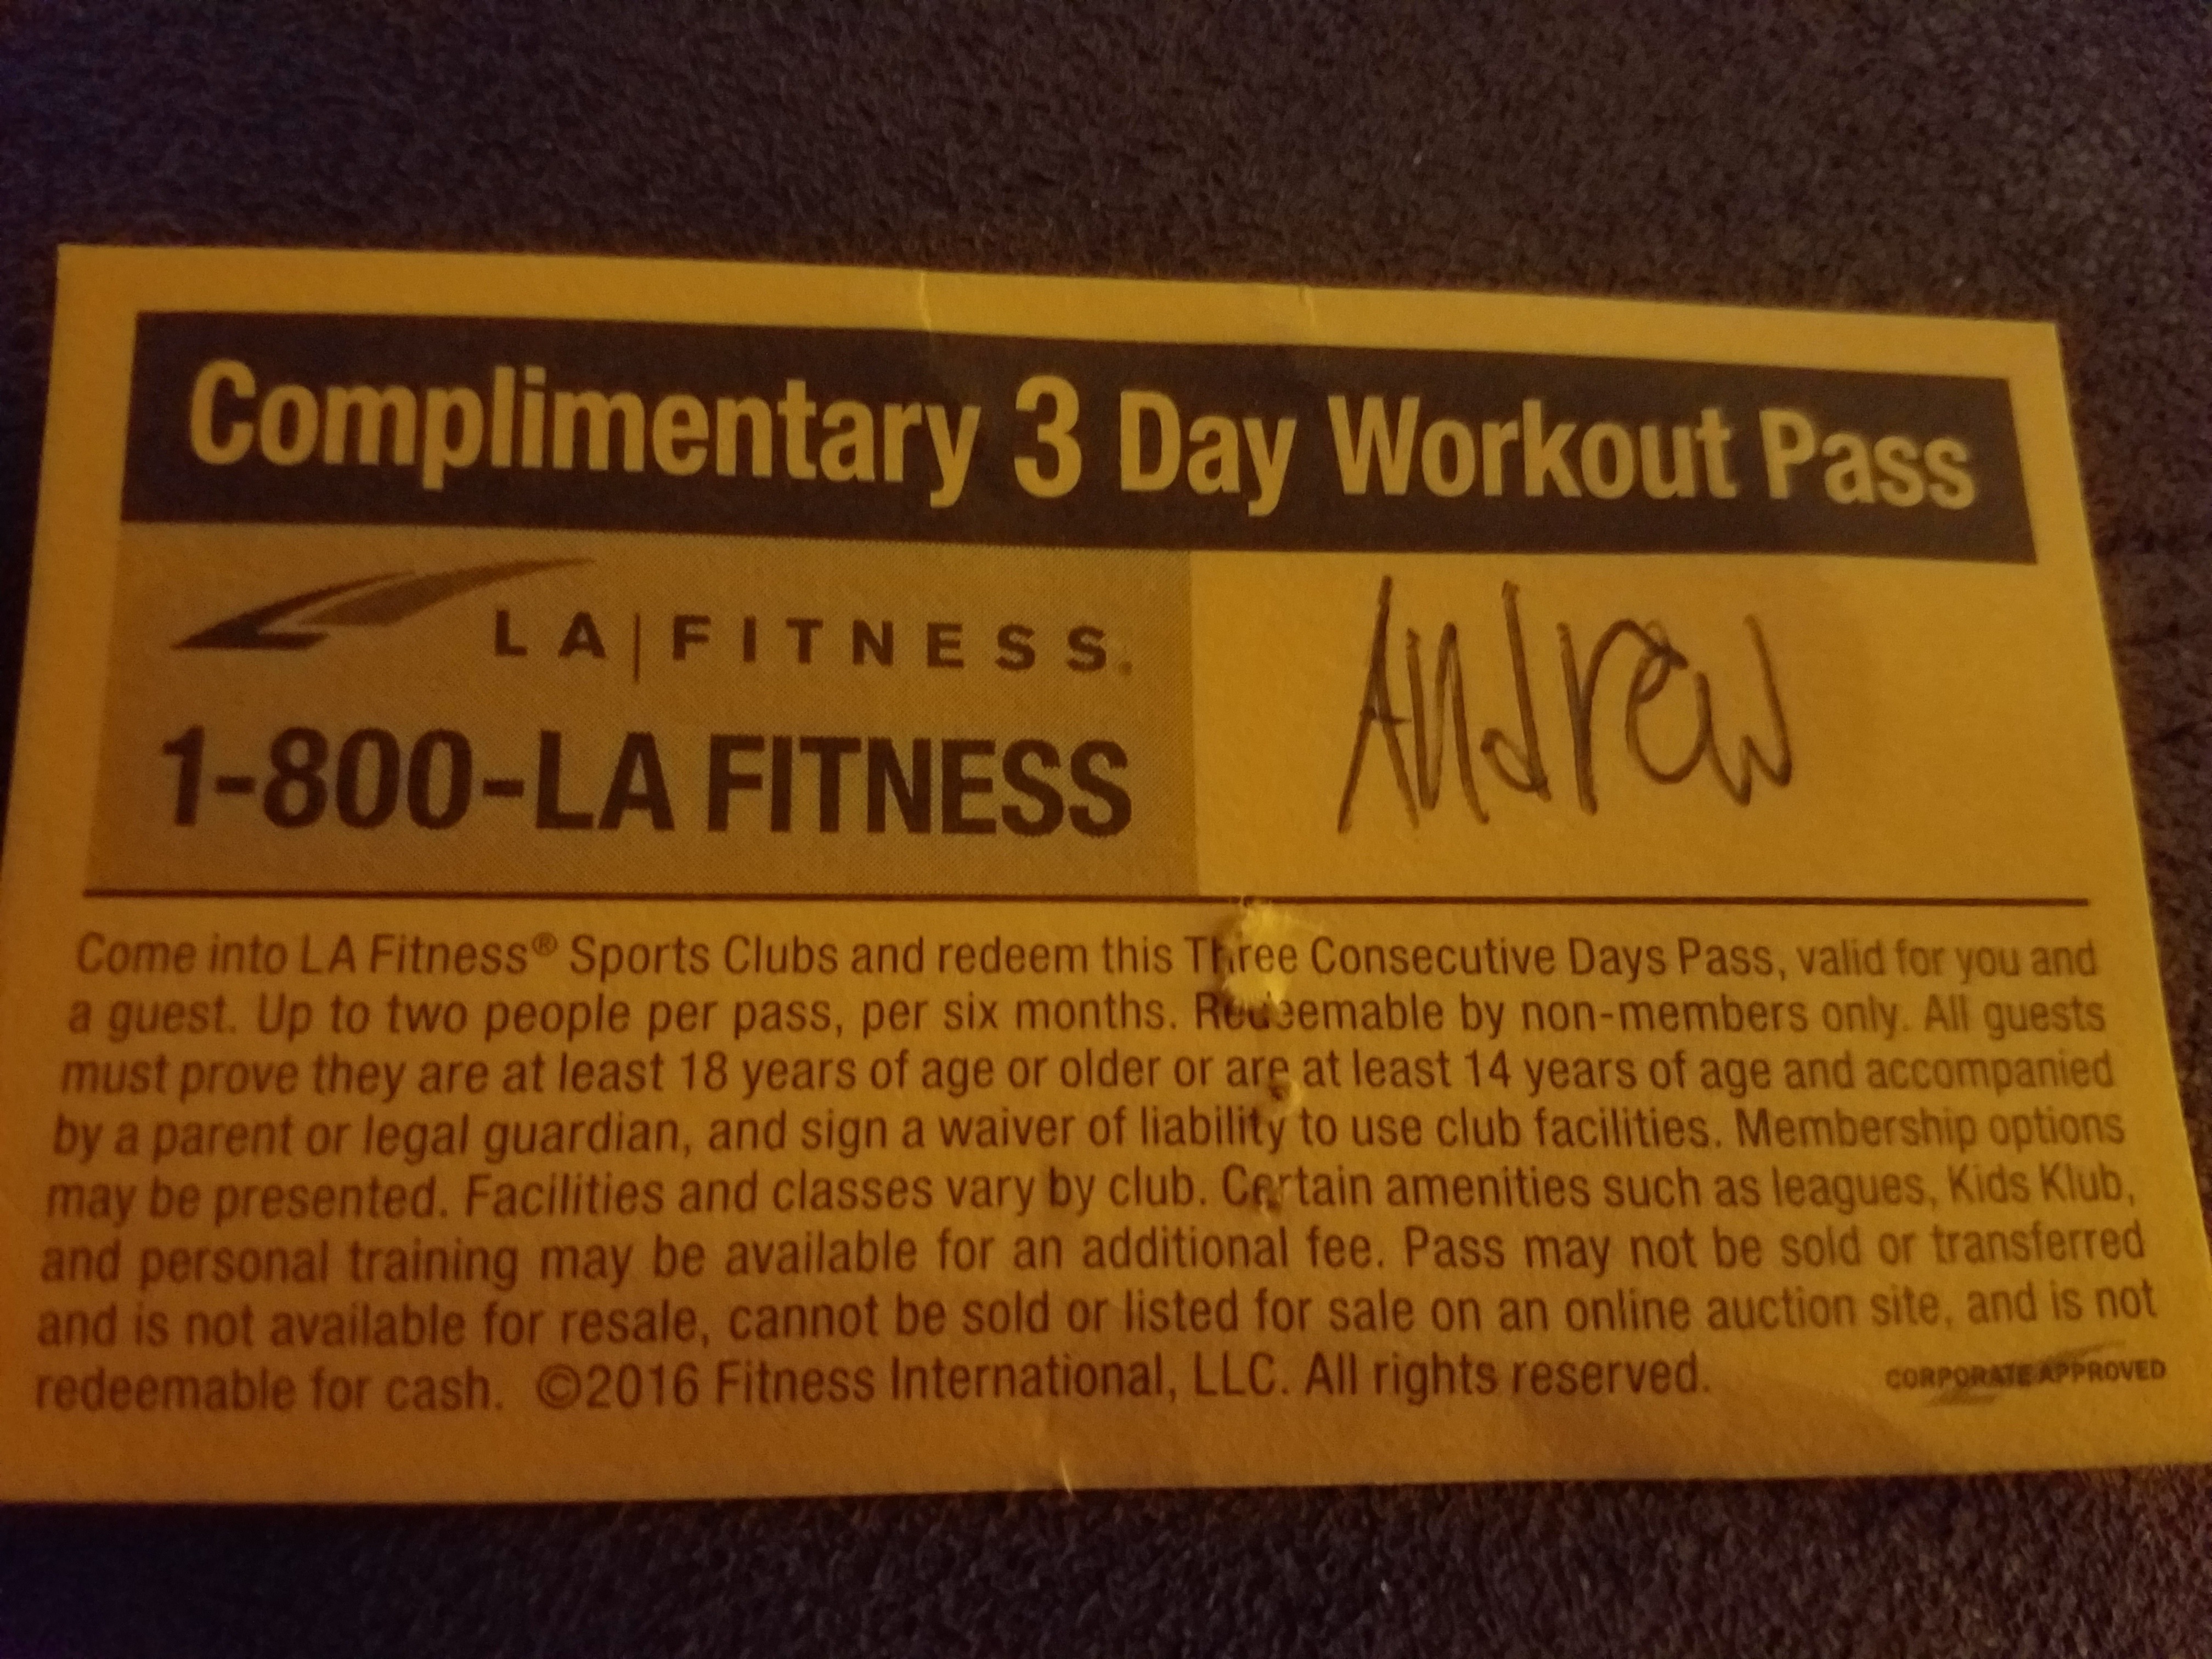 anytime fitness guest pass policy